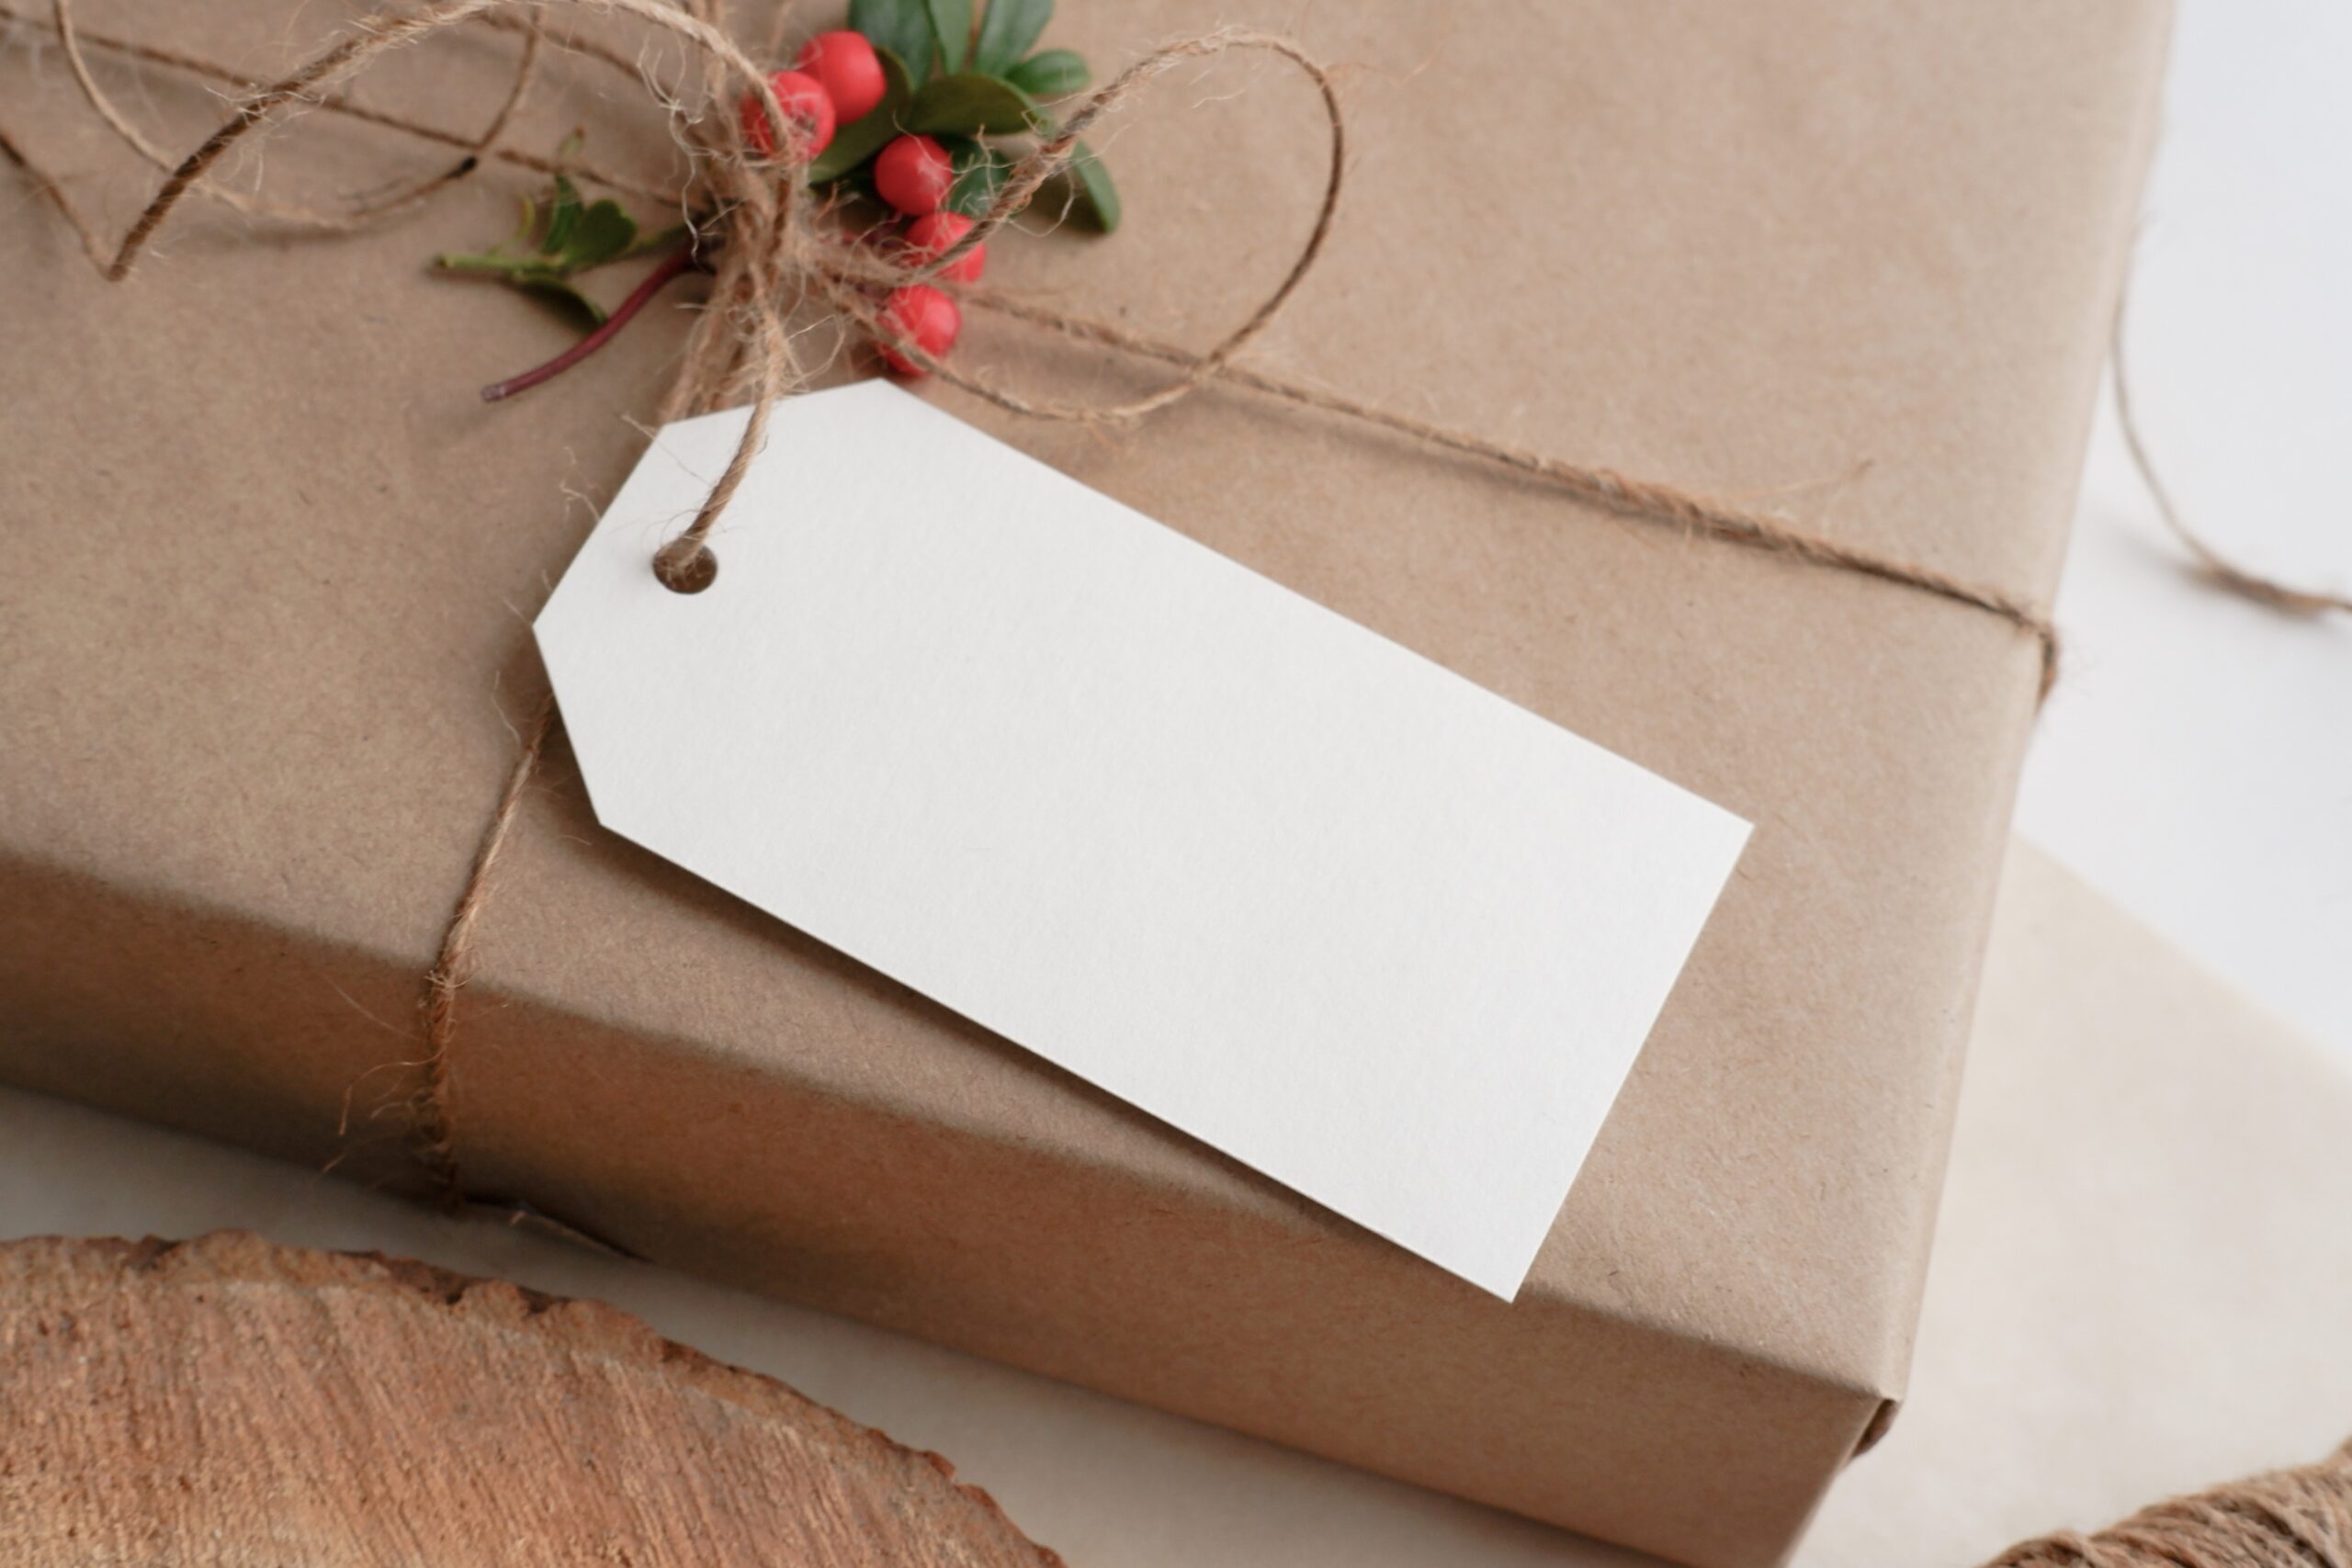 photograph of a rectangular gift wrapped in brown paper with an empty tag